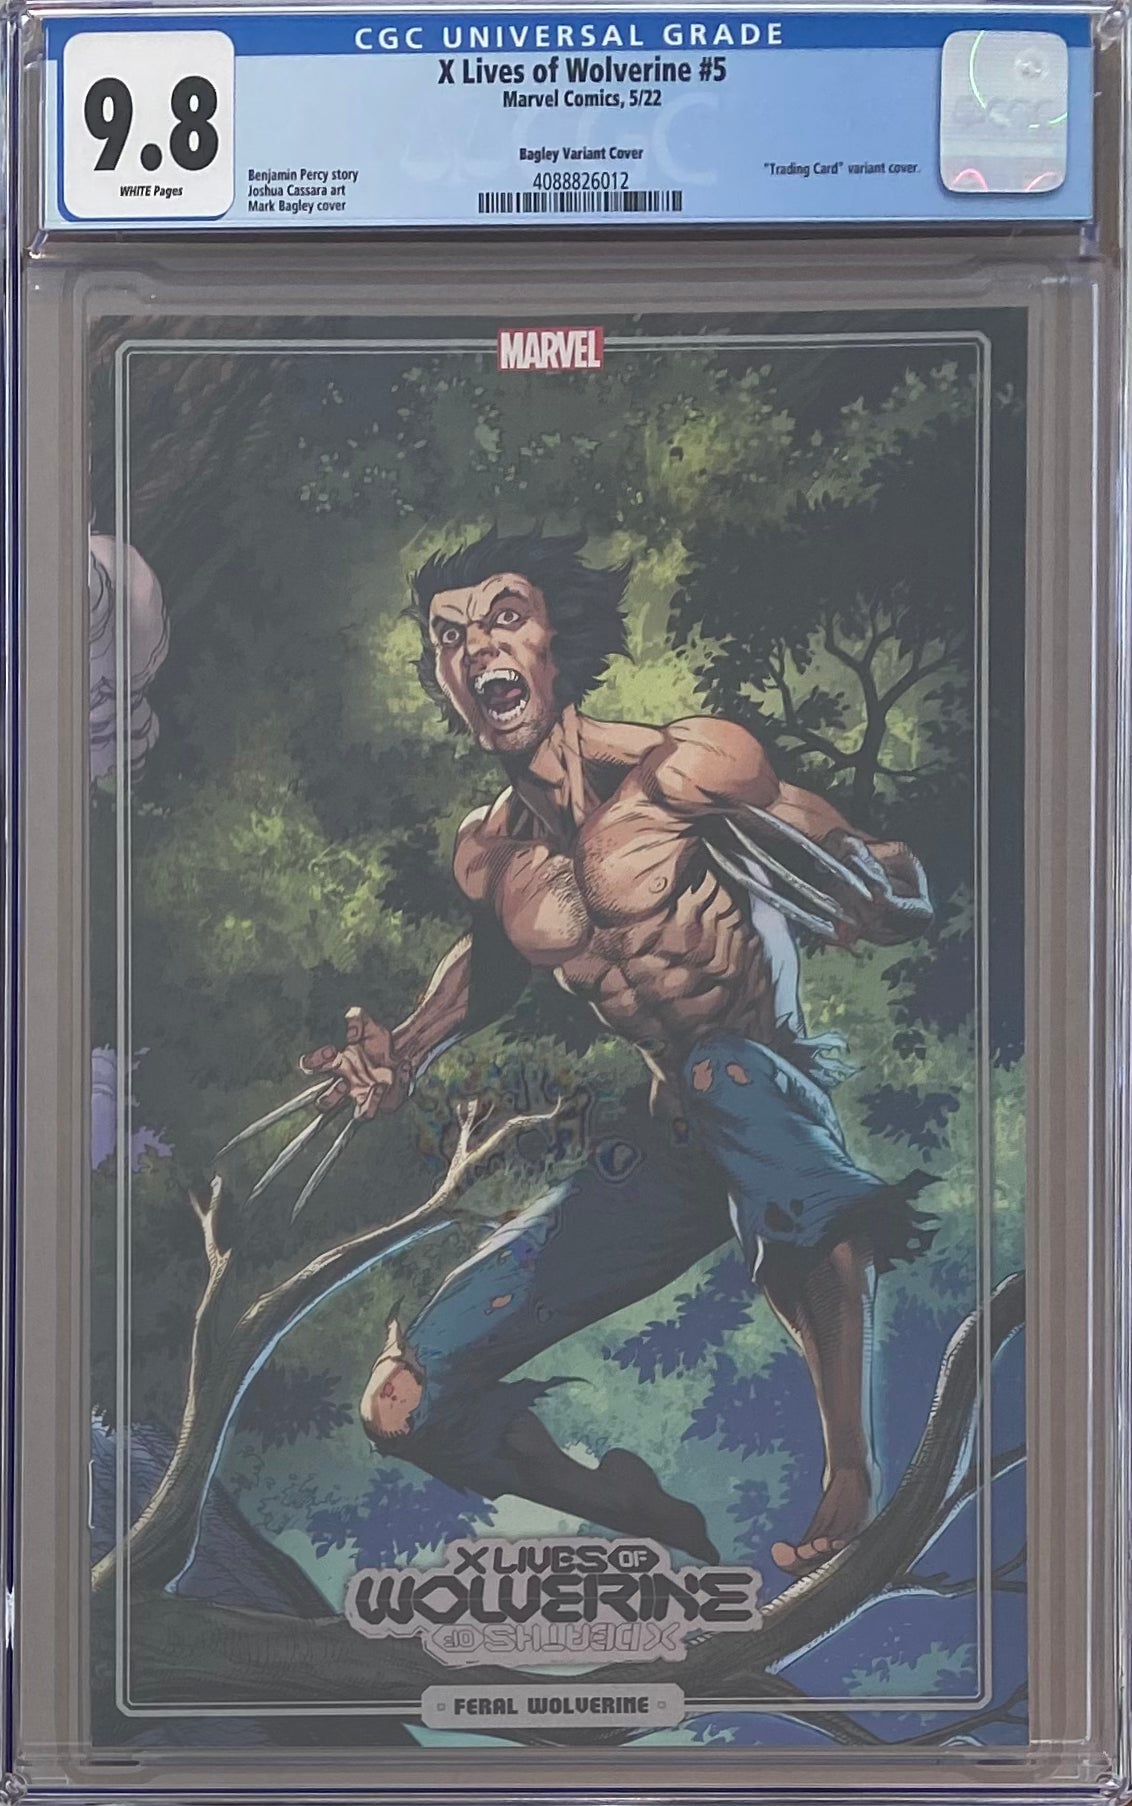 X Lives of Wolverine #5 Bagley Variant CGC 9.8